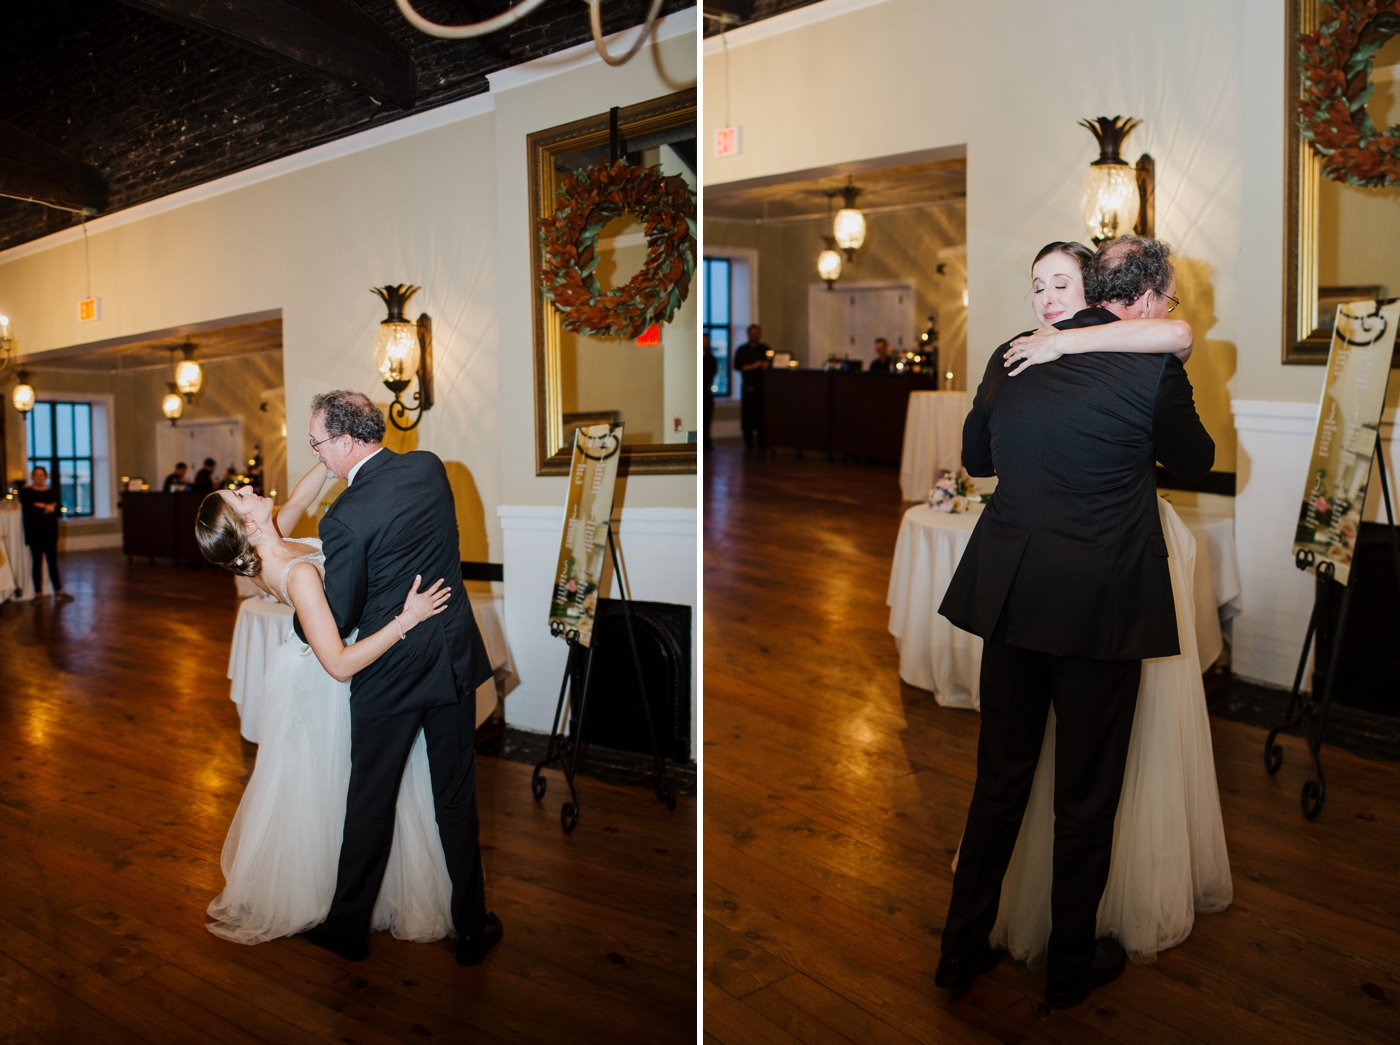 Colorful spring wedding reception at Vic’s On The River | Izzy and Co.